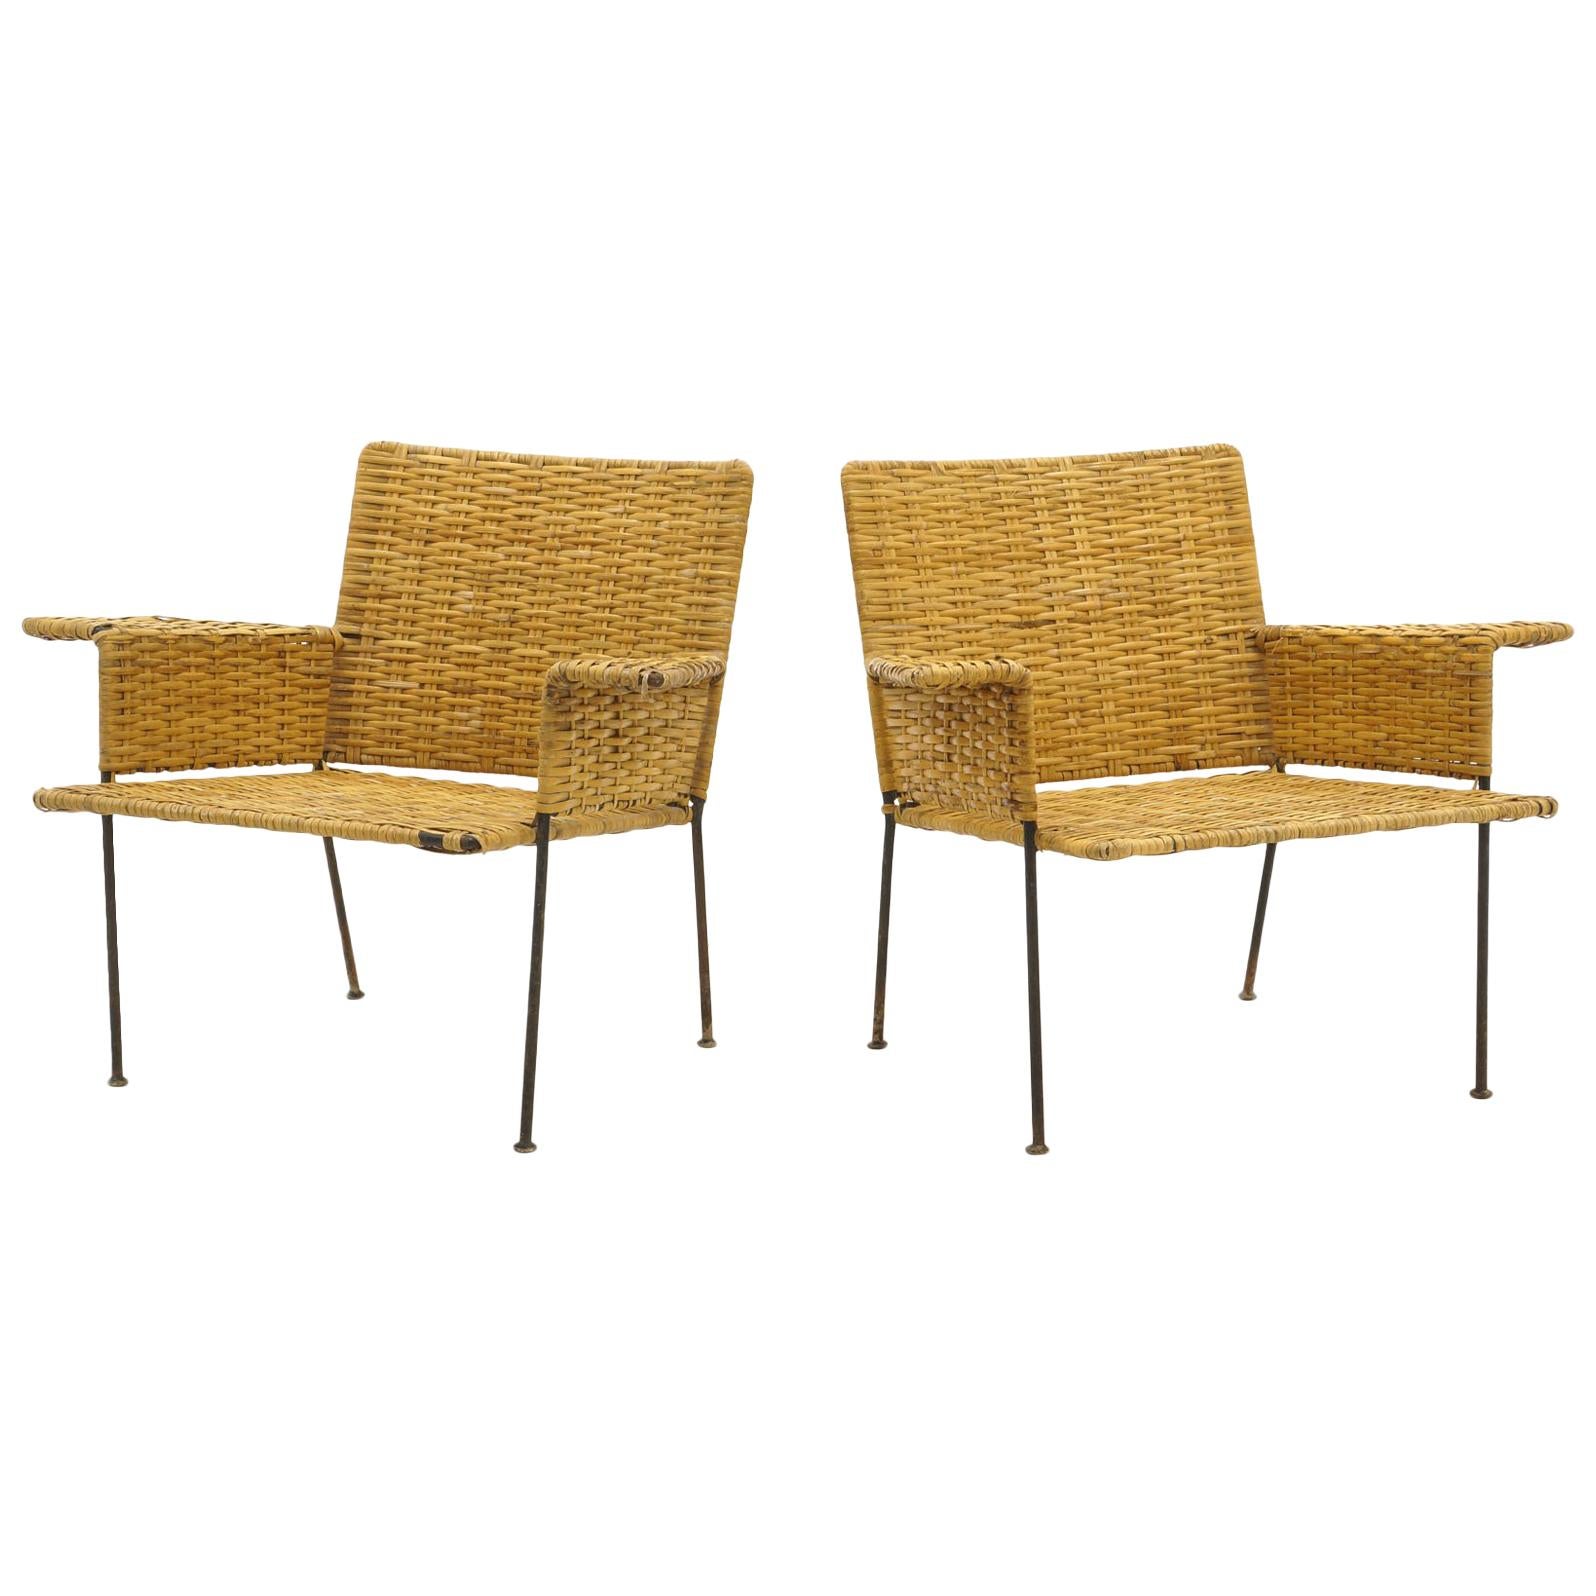 Pair of Wicker and Wrought Iron Chairs by Van Keppel and Green, 1950s